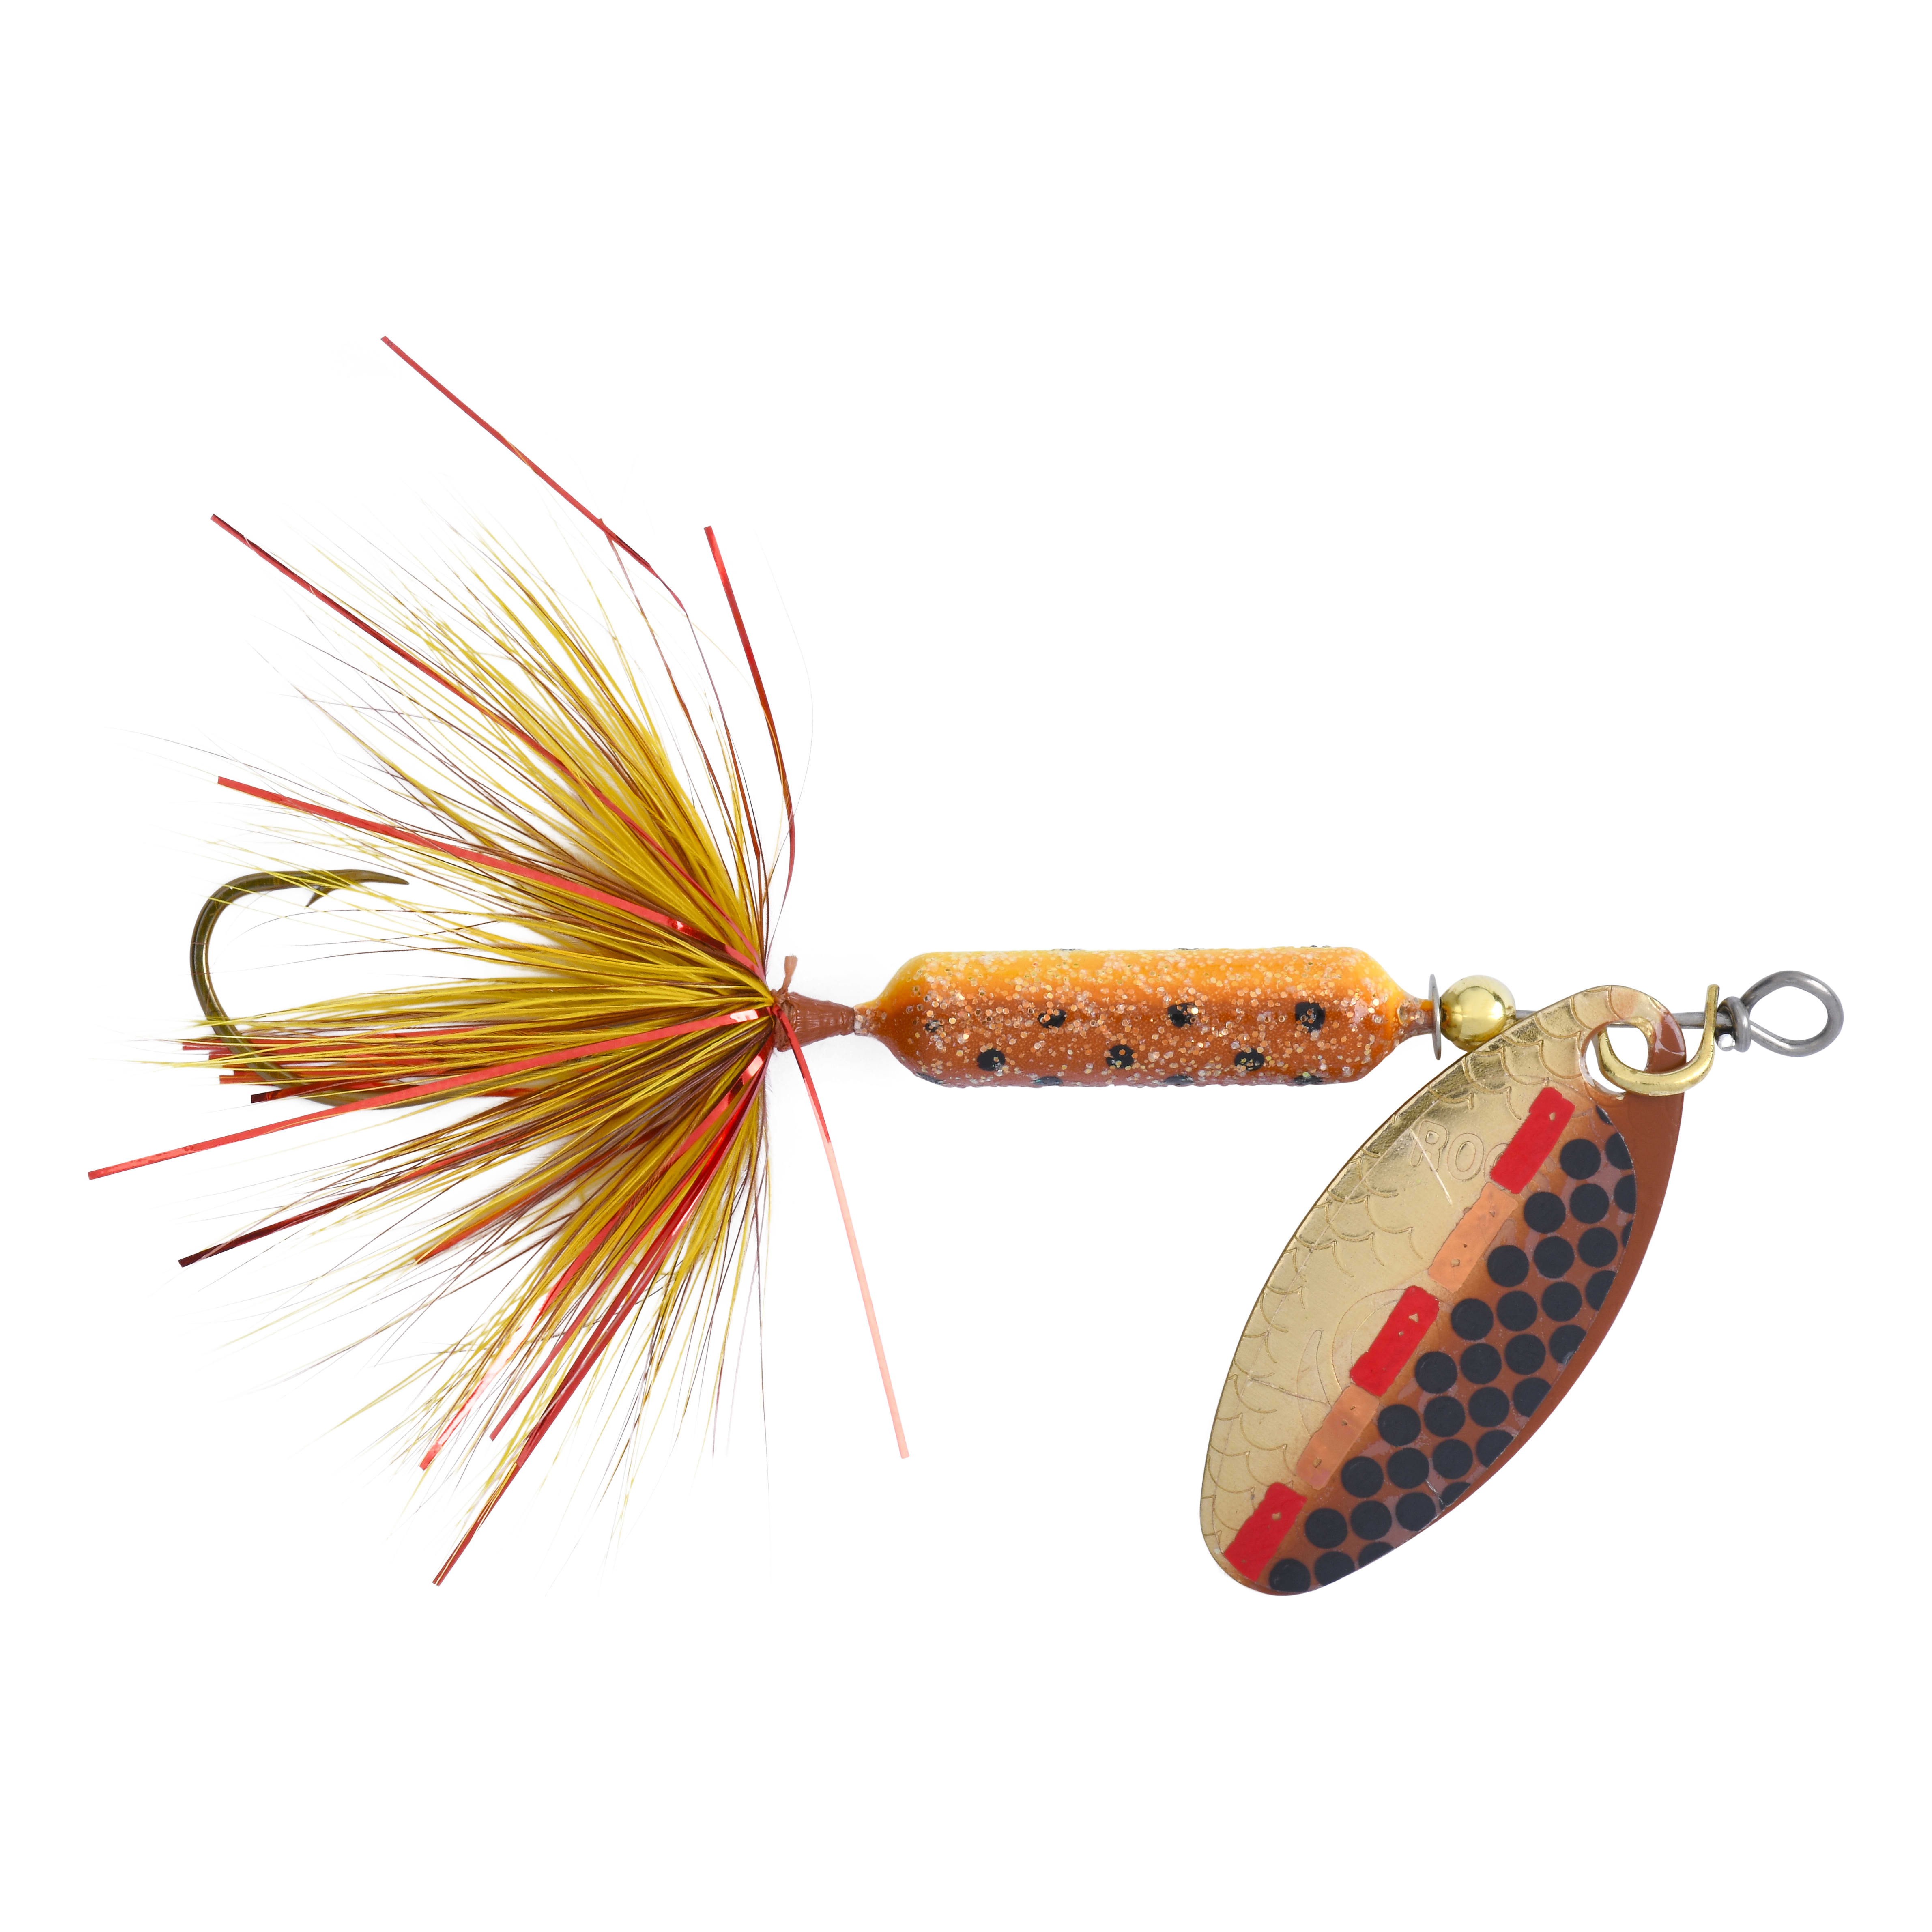 Williams® Favourites Trout Kit 4-Pack